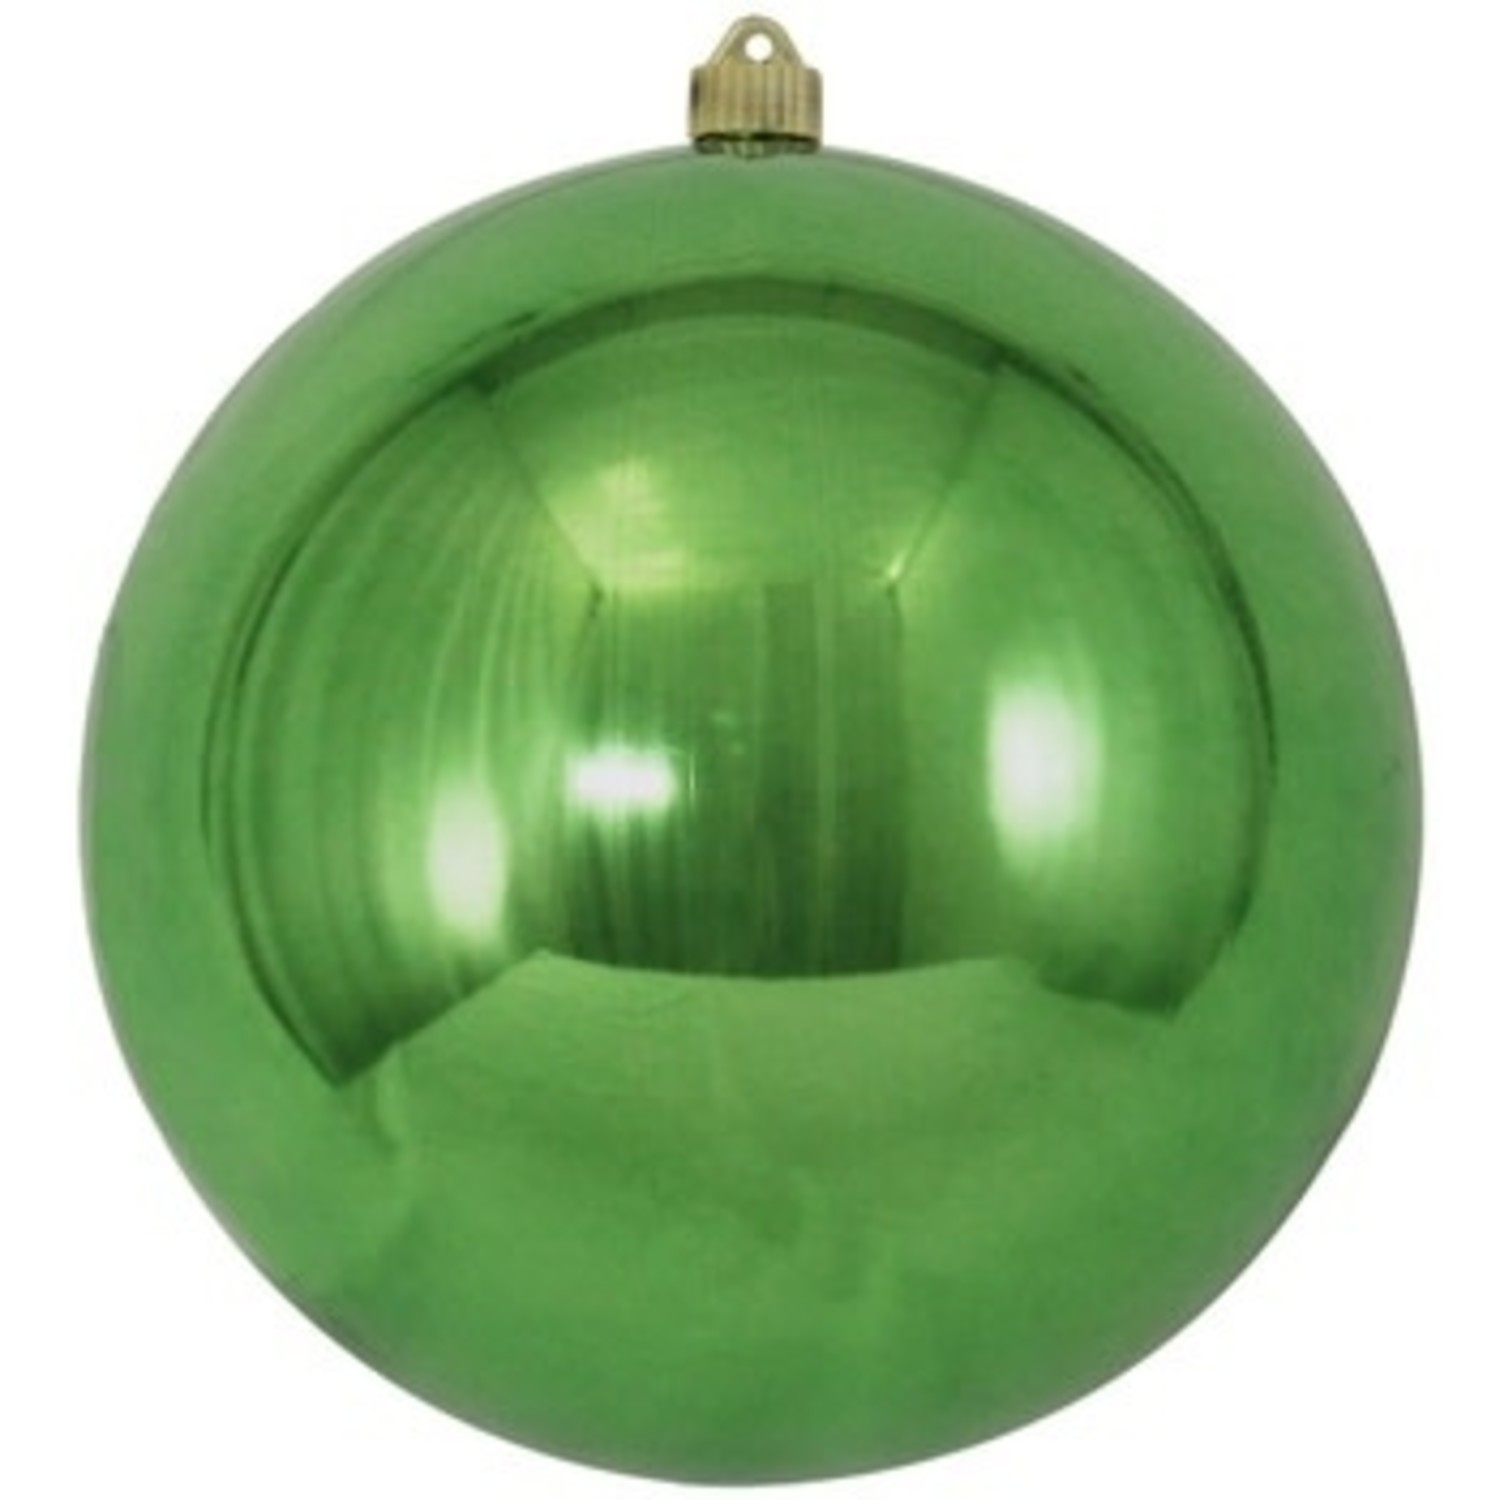 10 Giant Commercial Ball Ornament Case